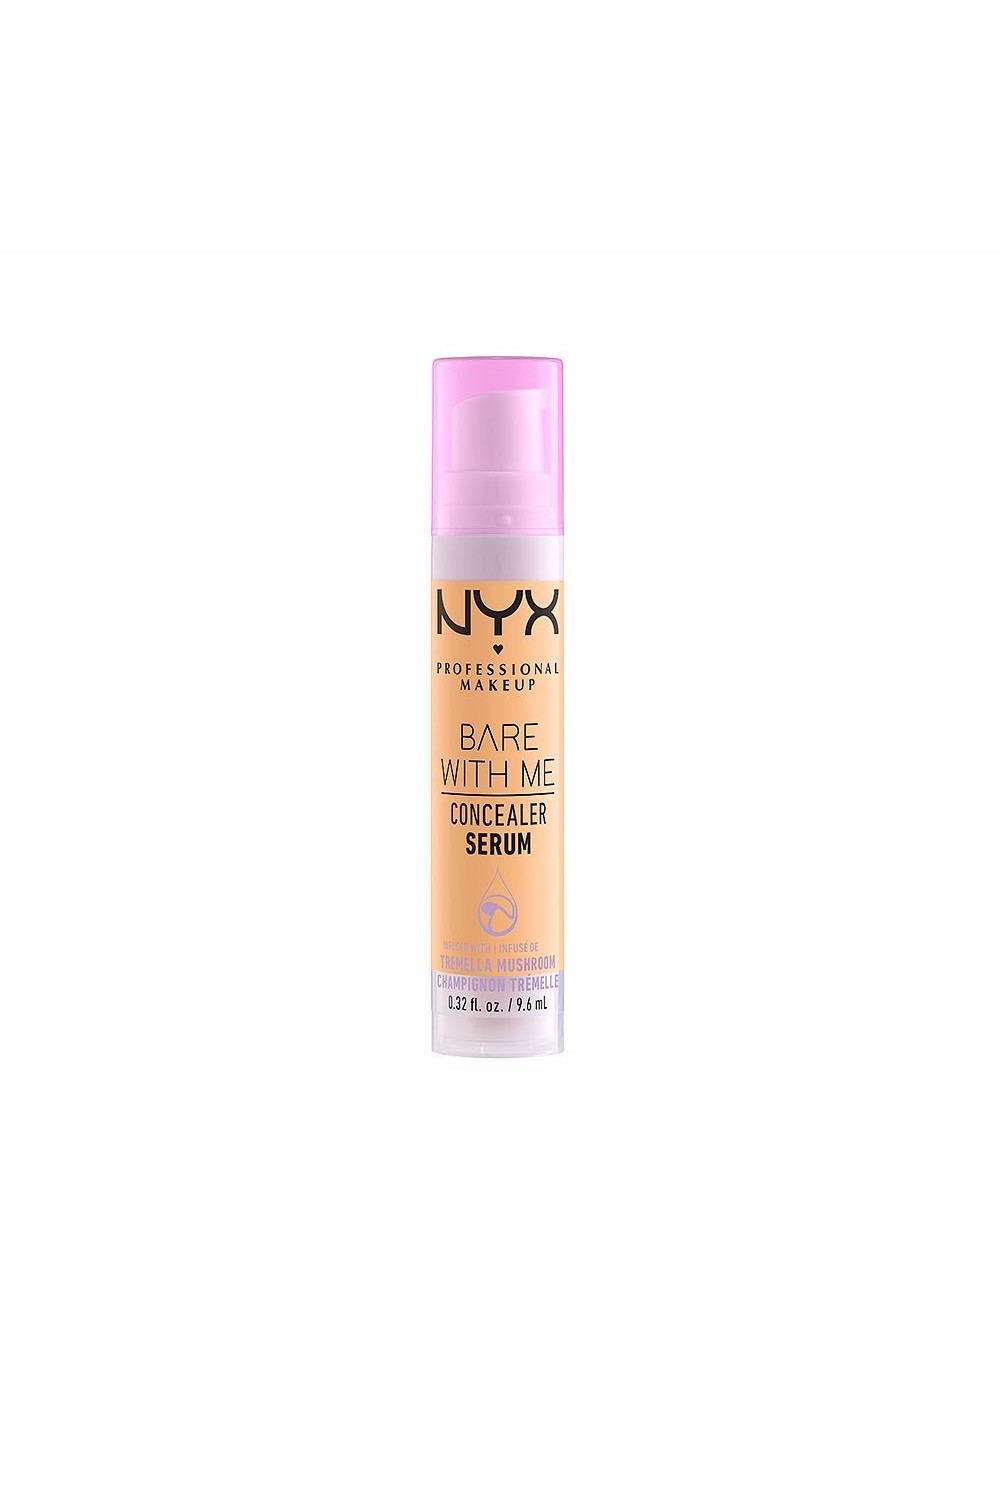 Nyx Bare With Me Concealer Serum 05-Golden